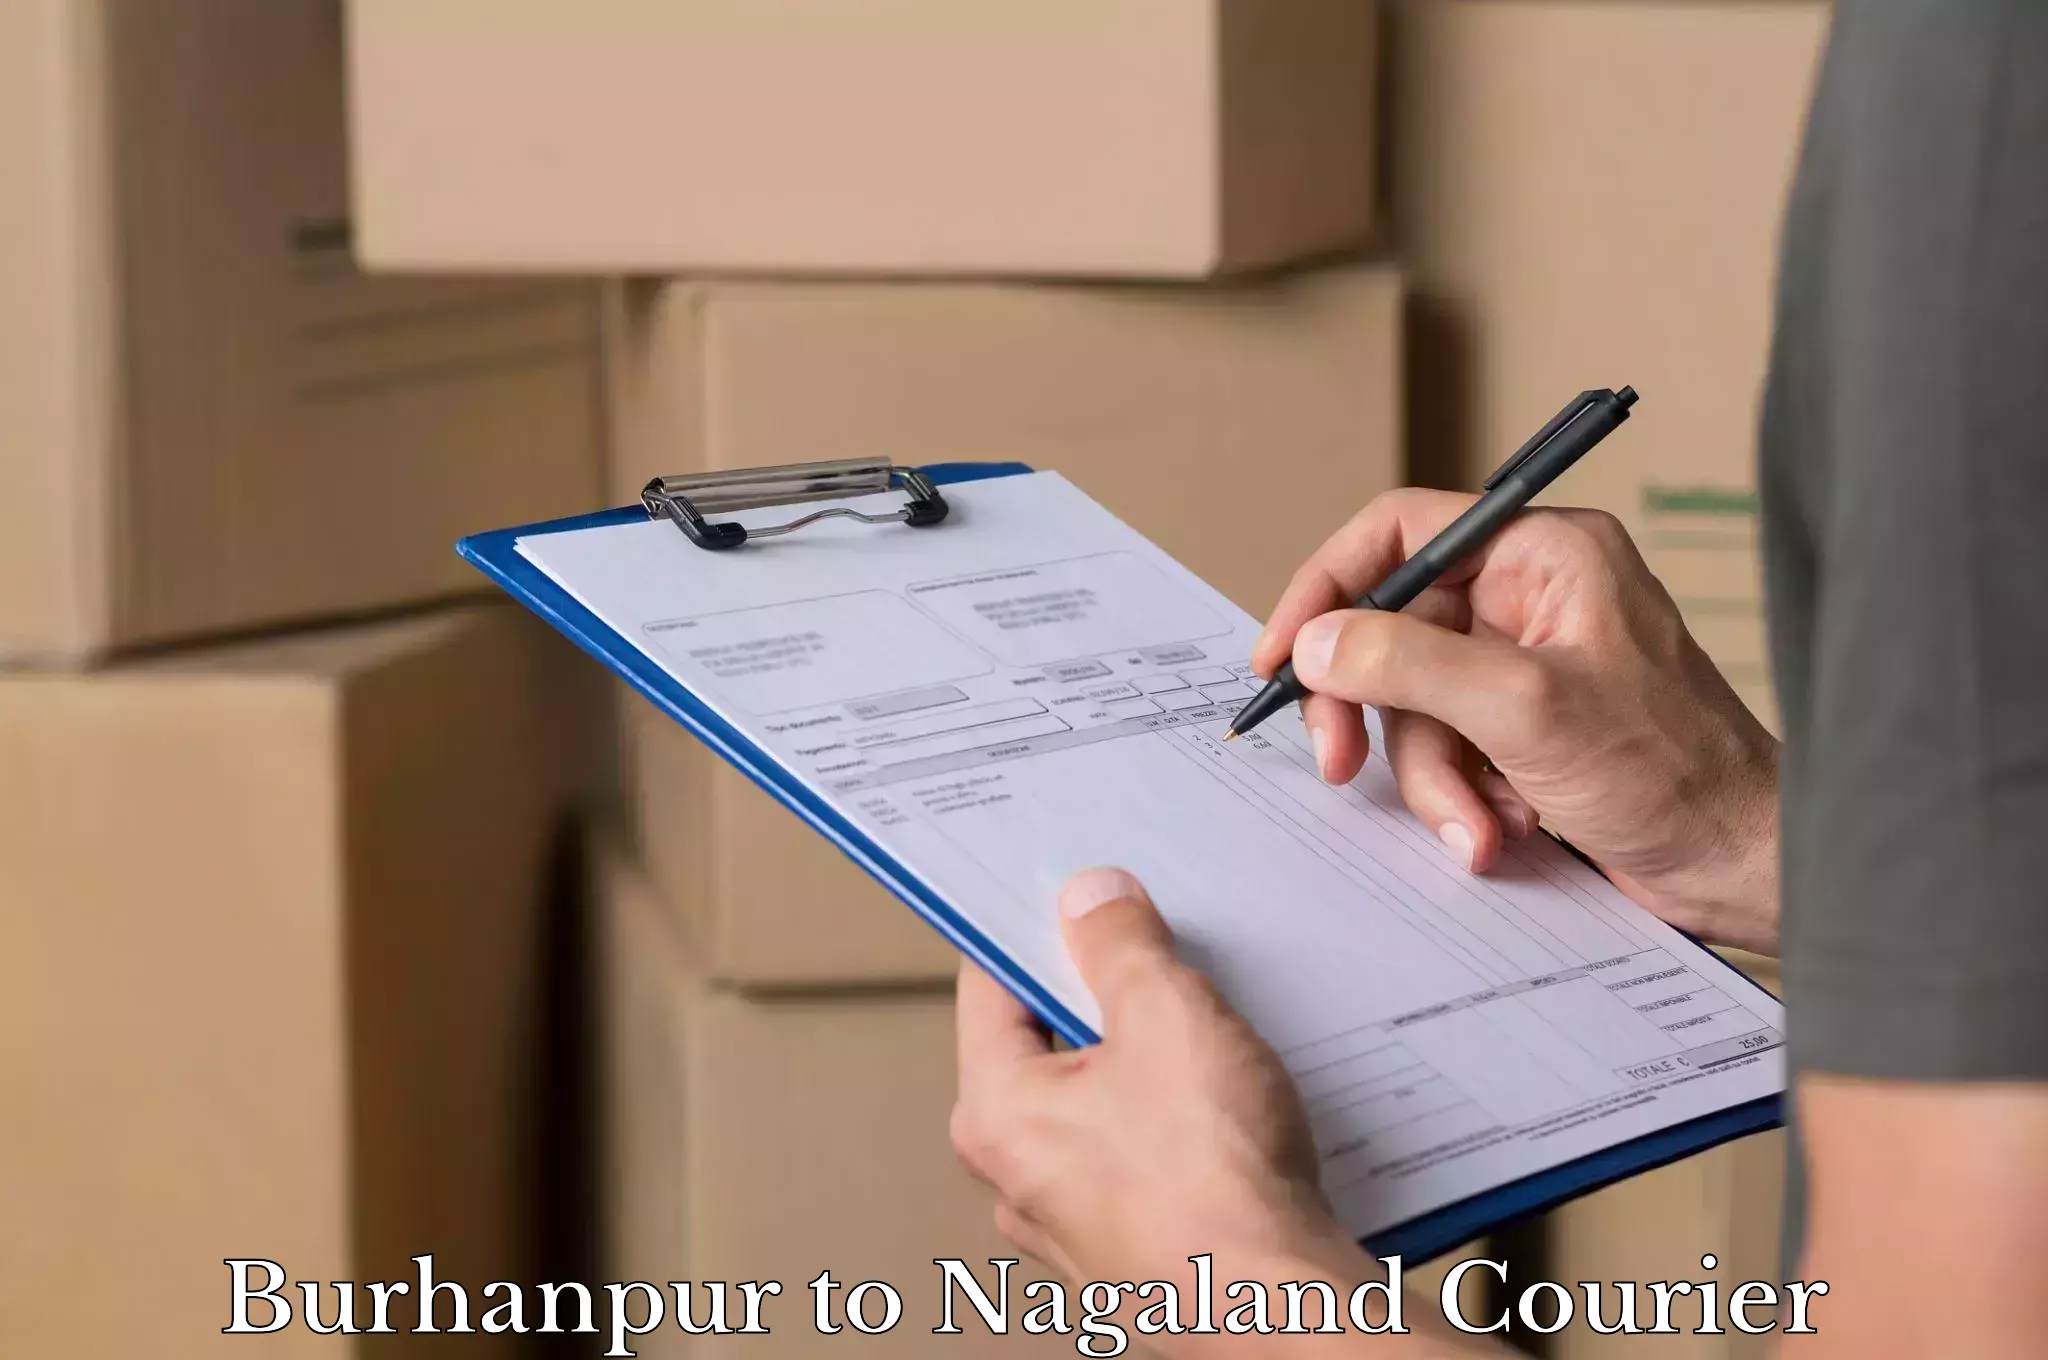 Luggage transport consultancy Burhanpur to Nagaland